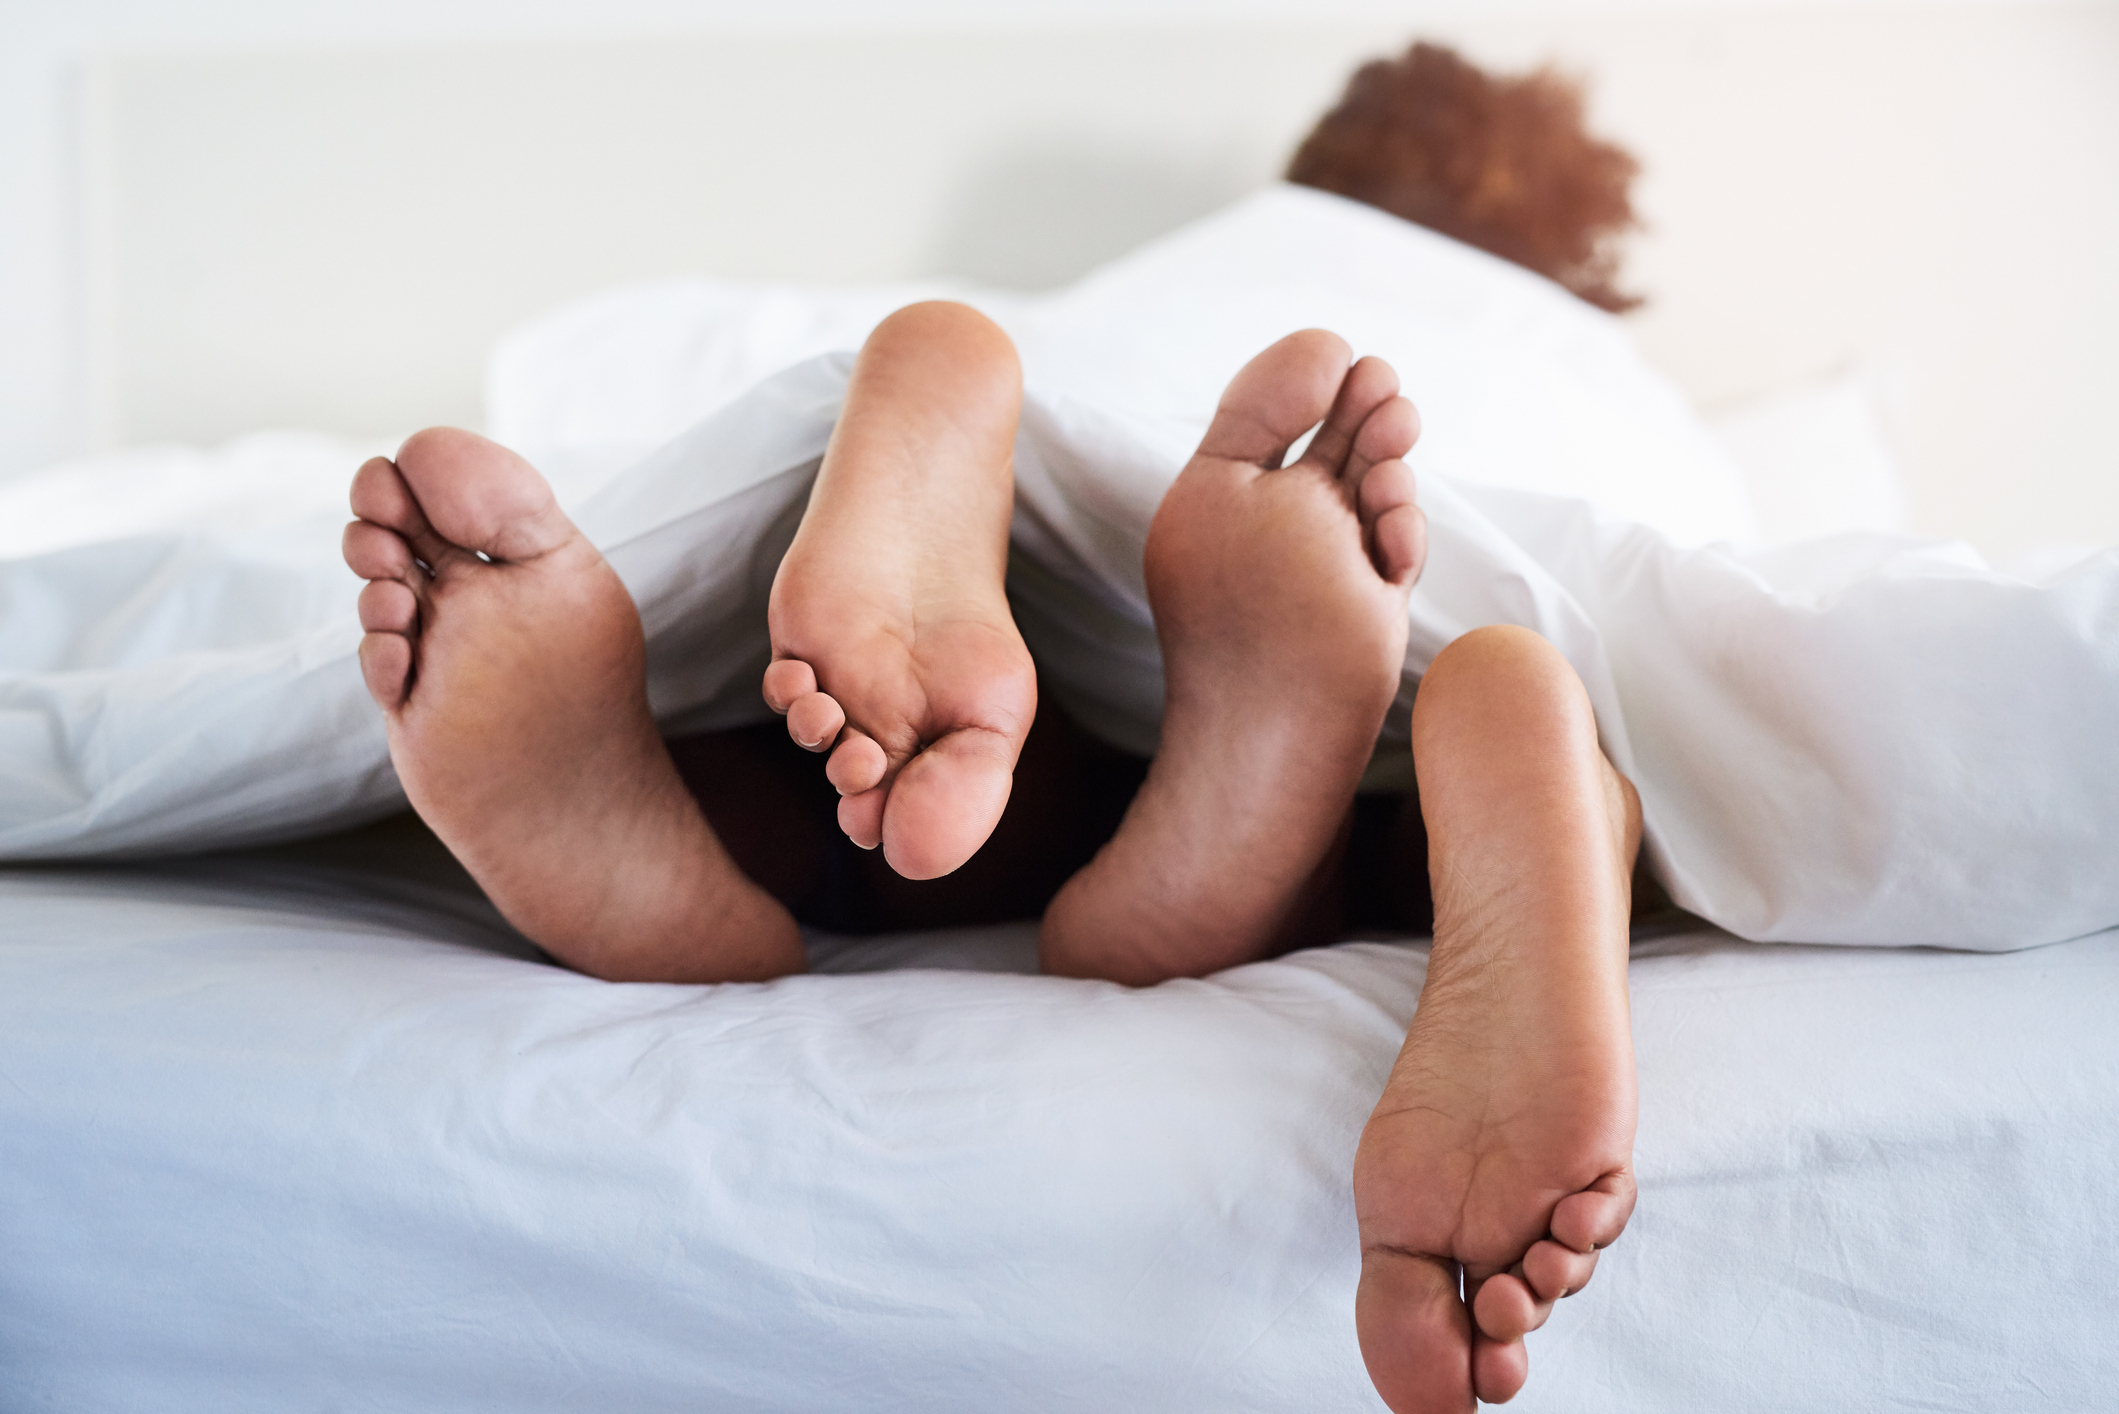 Two pairs of feet stick out from under bed sheets, suggesting an intimate moment